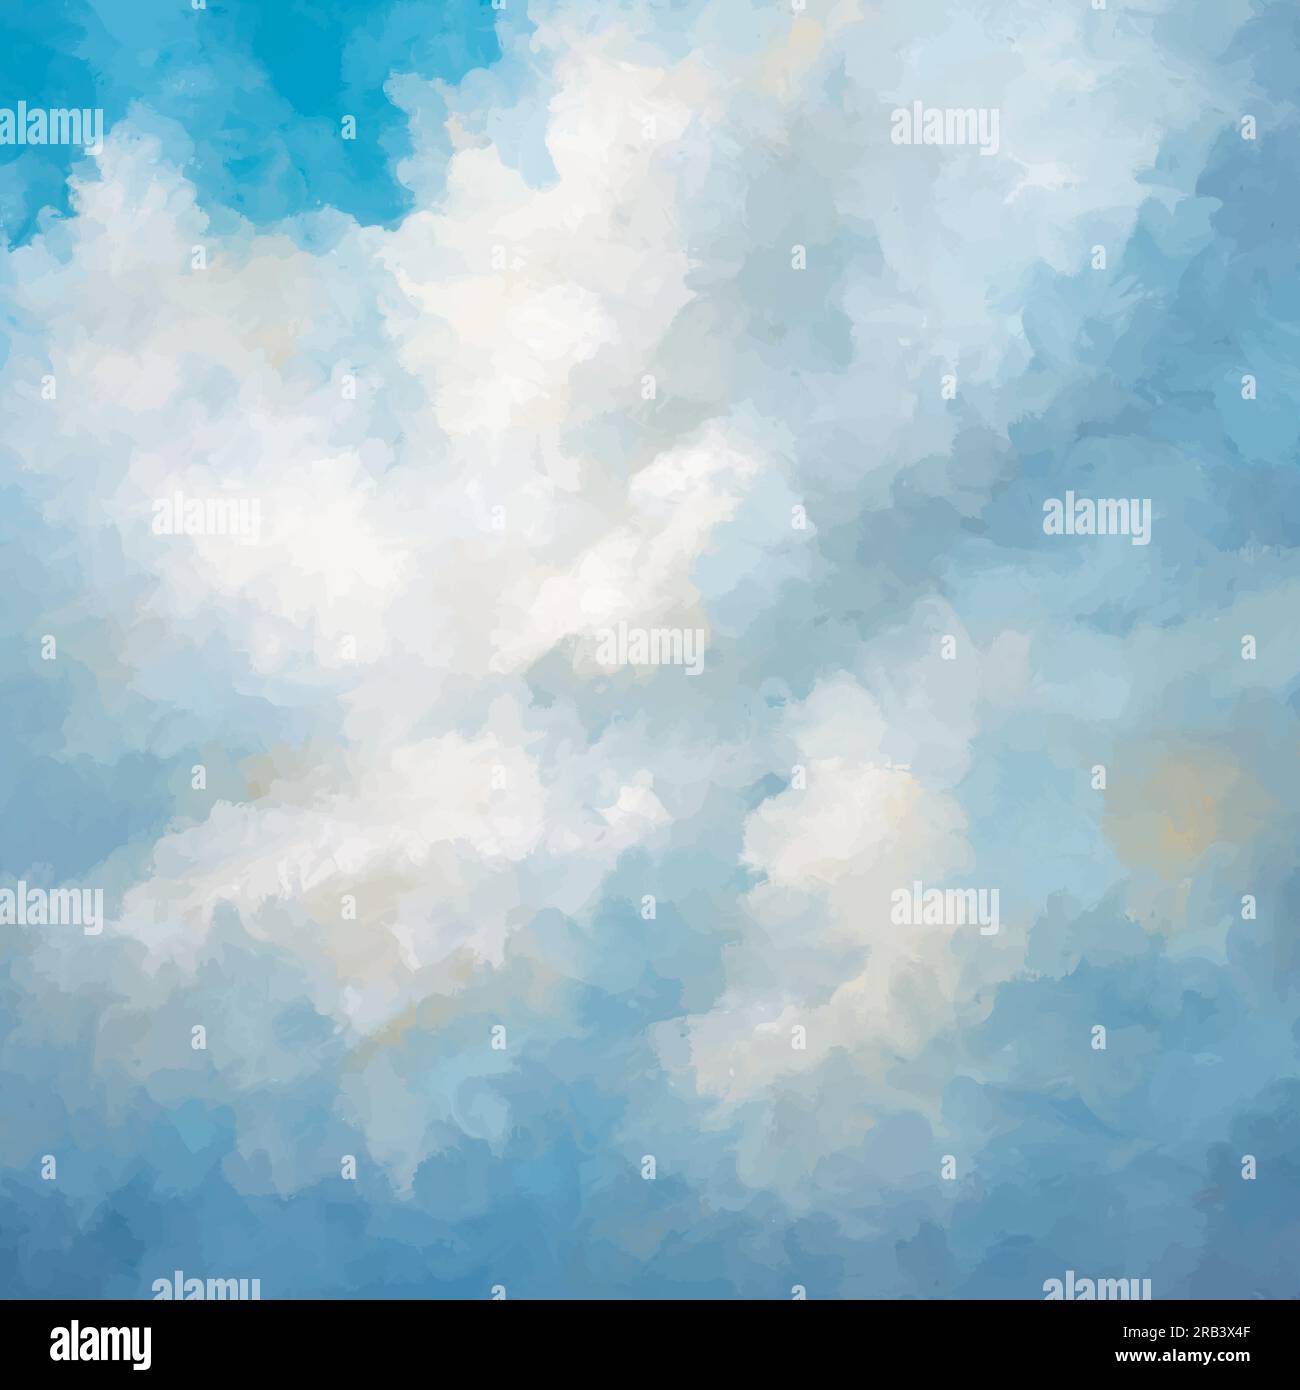 hand painted abstract clouds background Stock Vector